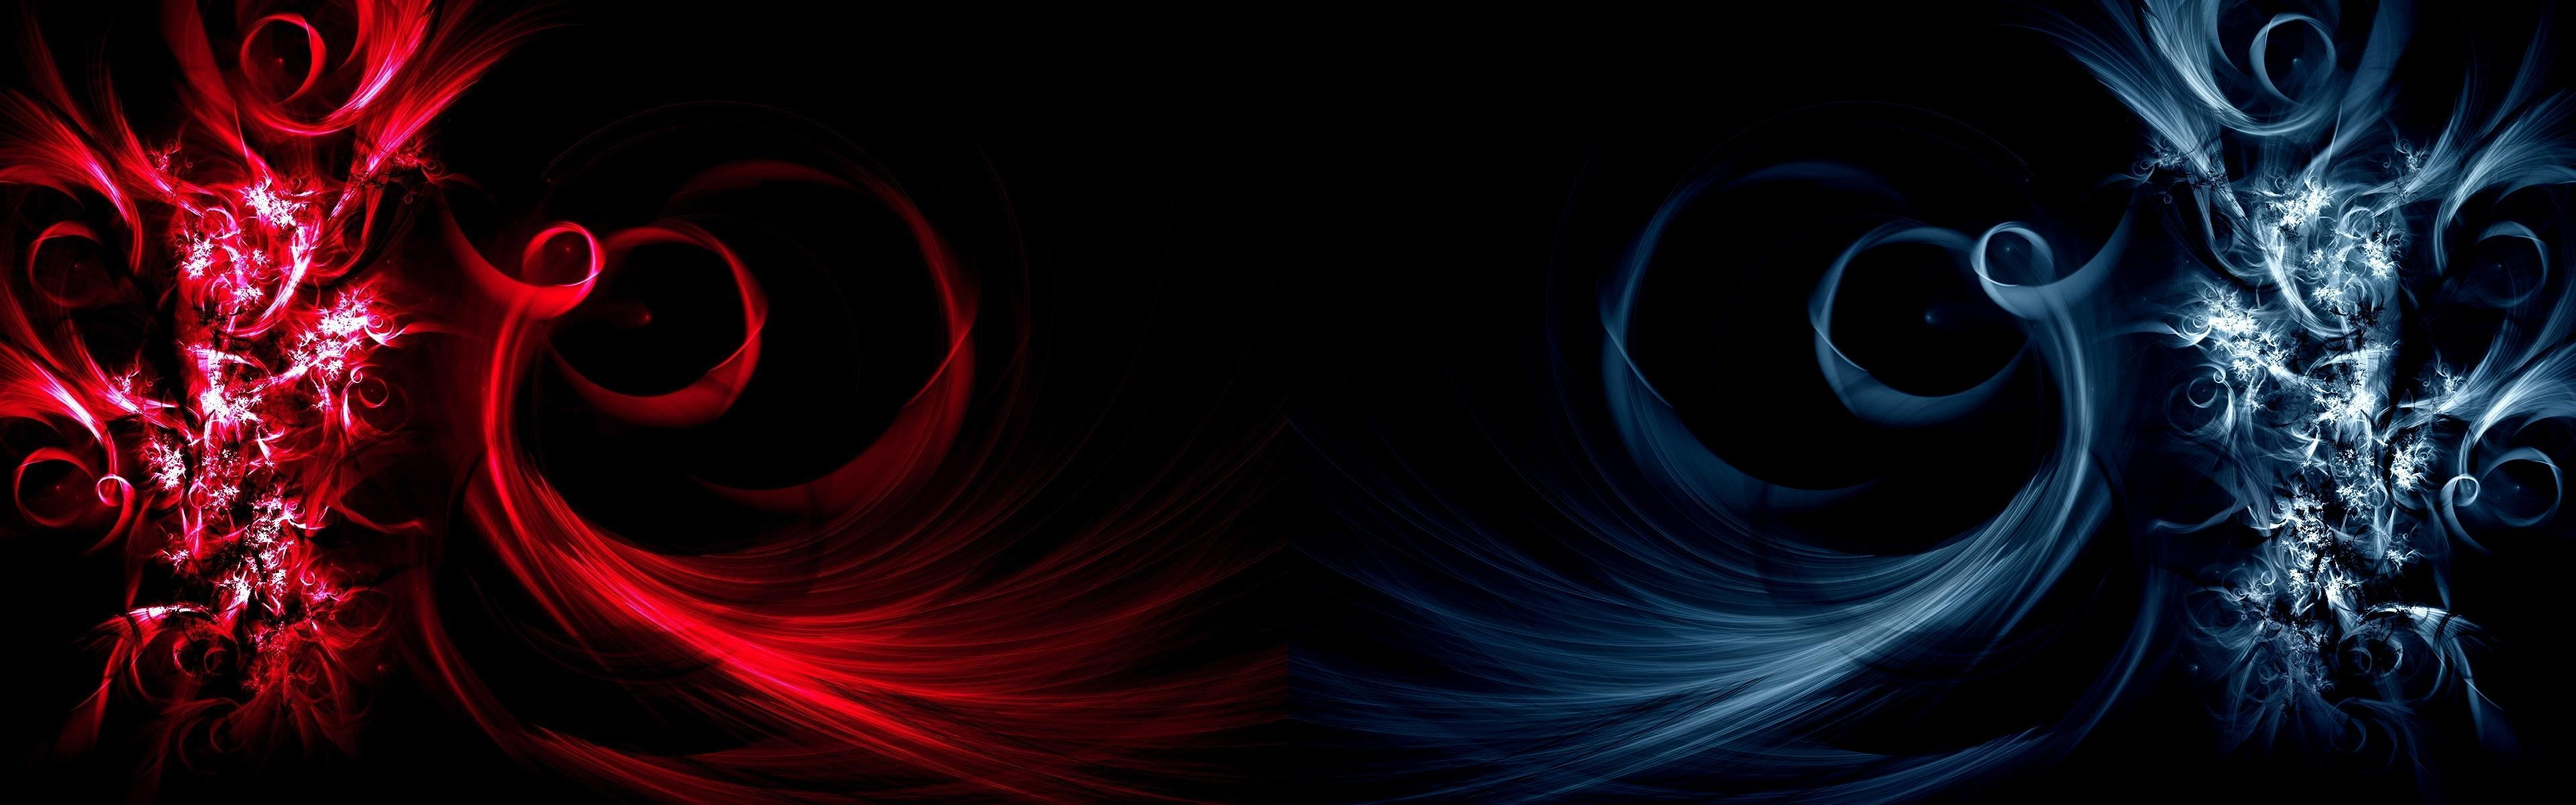 Blue And Red Flame Illustration Digital Art Fire Ice Hd Wallpaper Wallpaper Flare